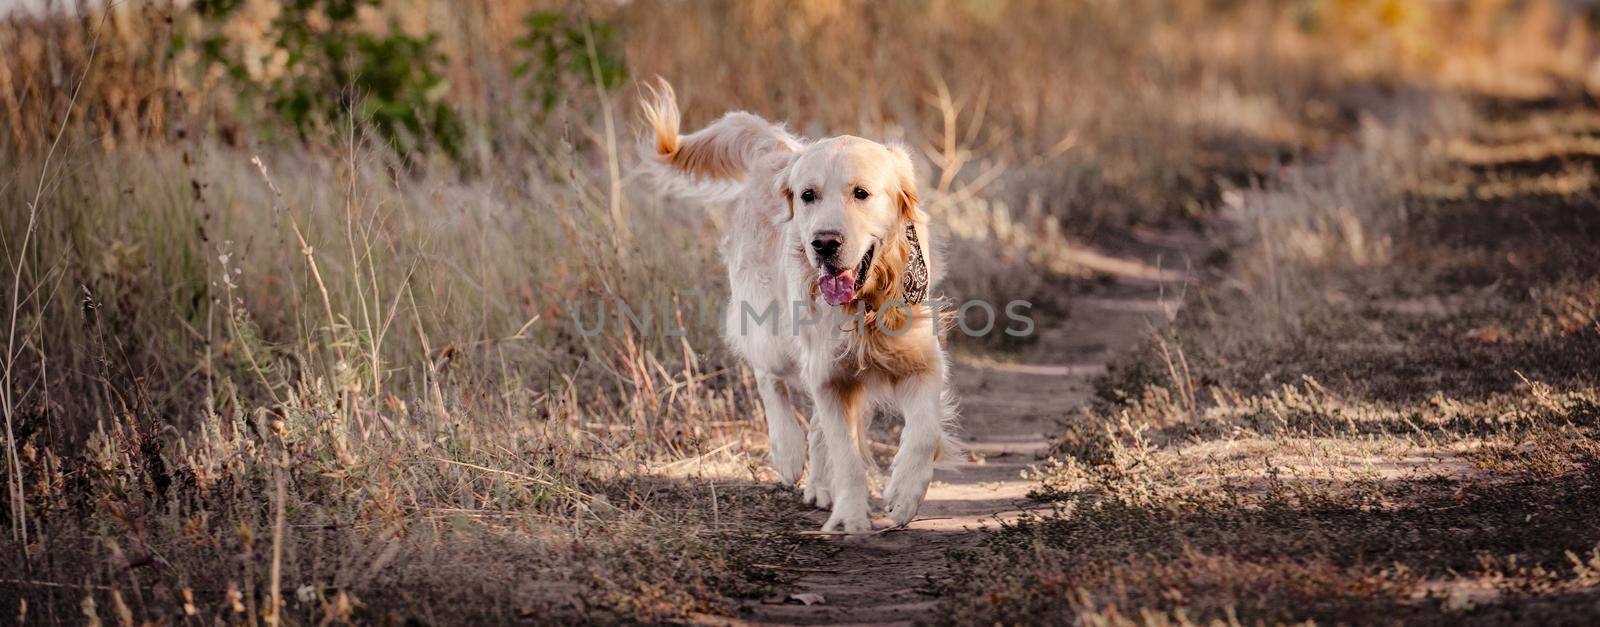 Golden retriever dog walking in autumn park in yellow grass with tonque out. Purebred pet labrador outdoors in sunny day